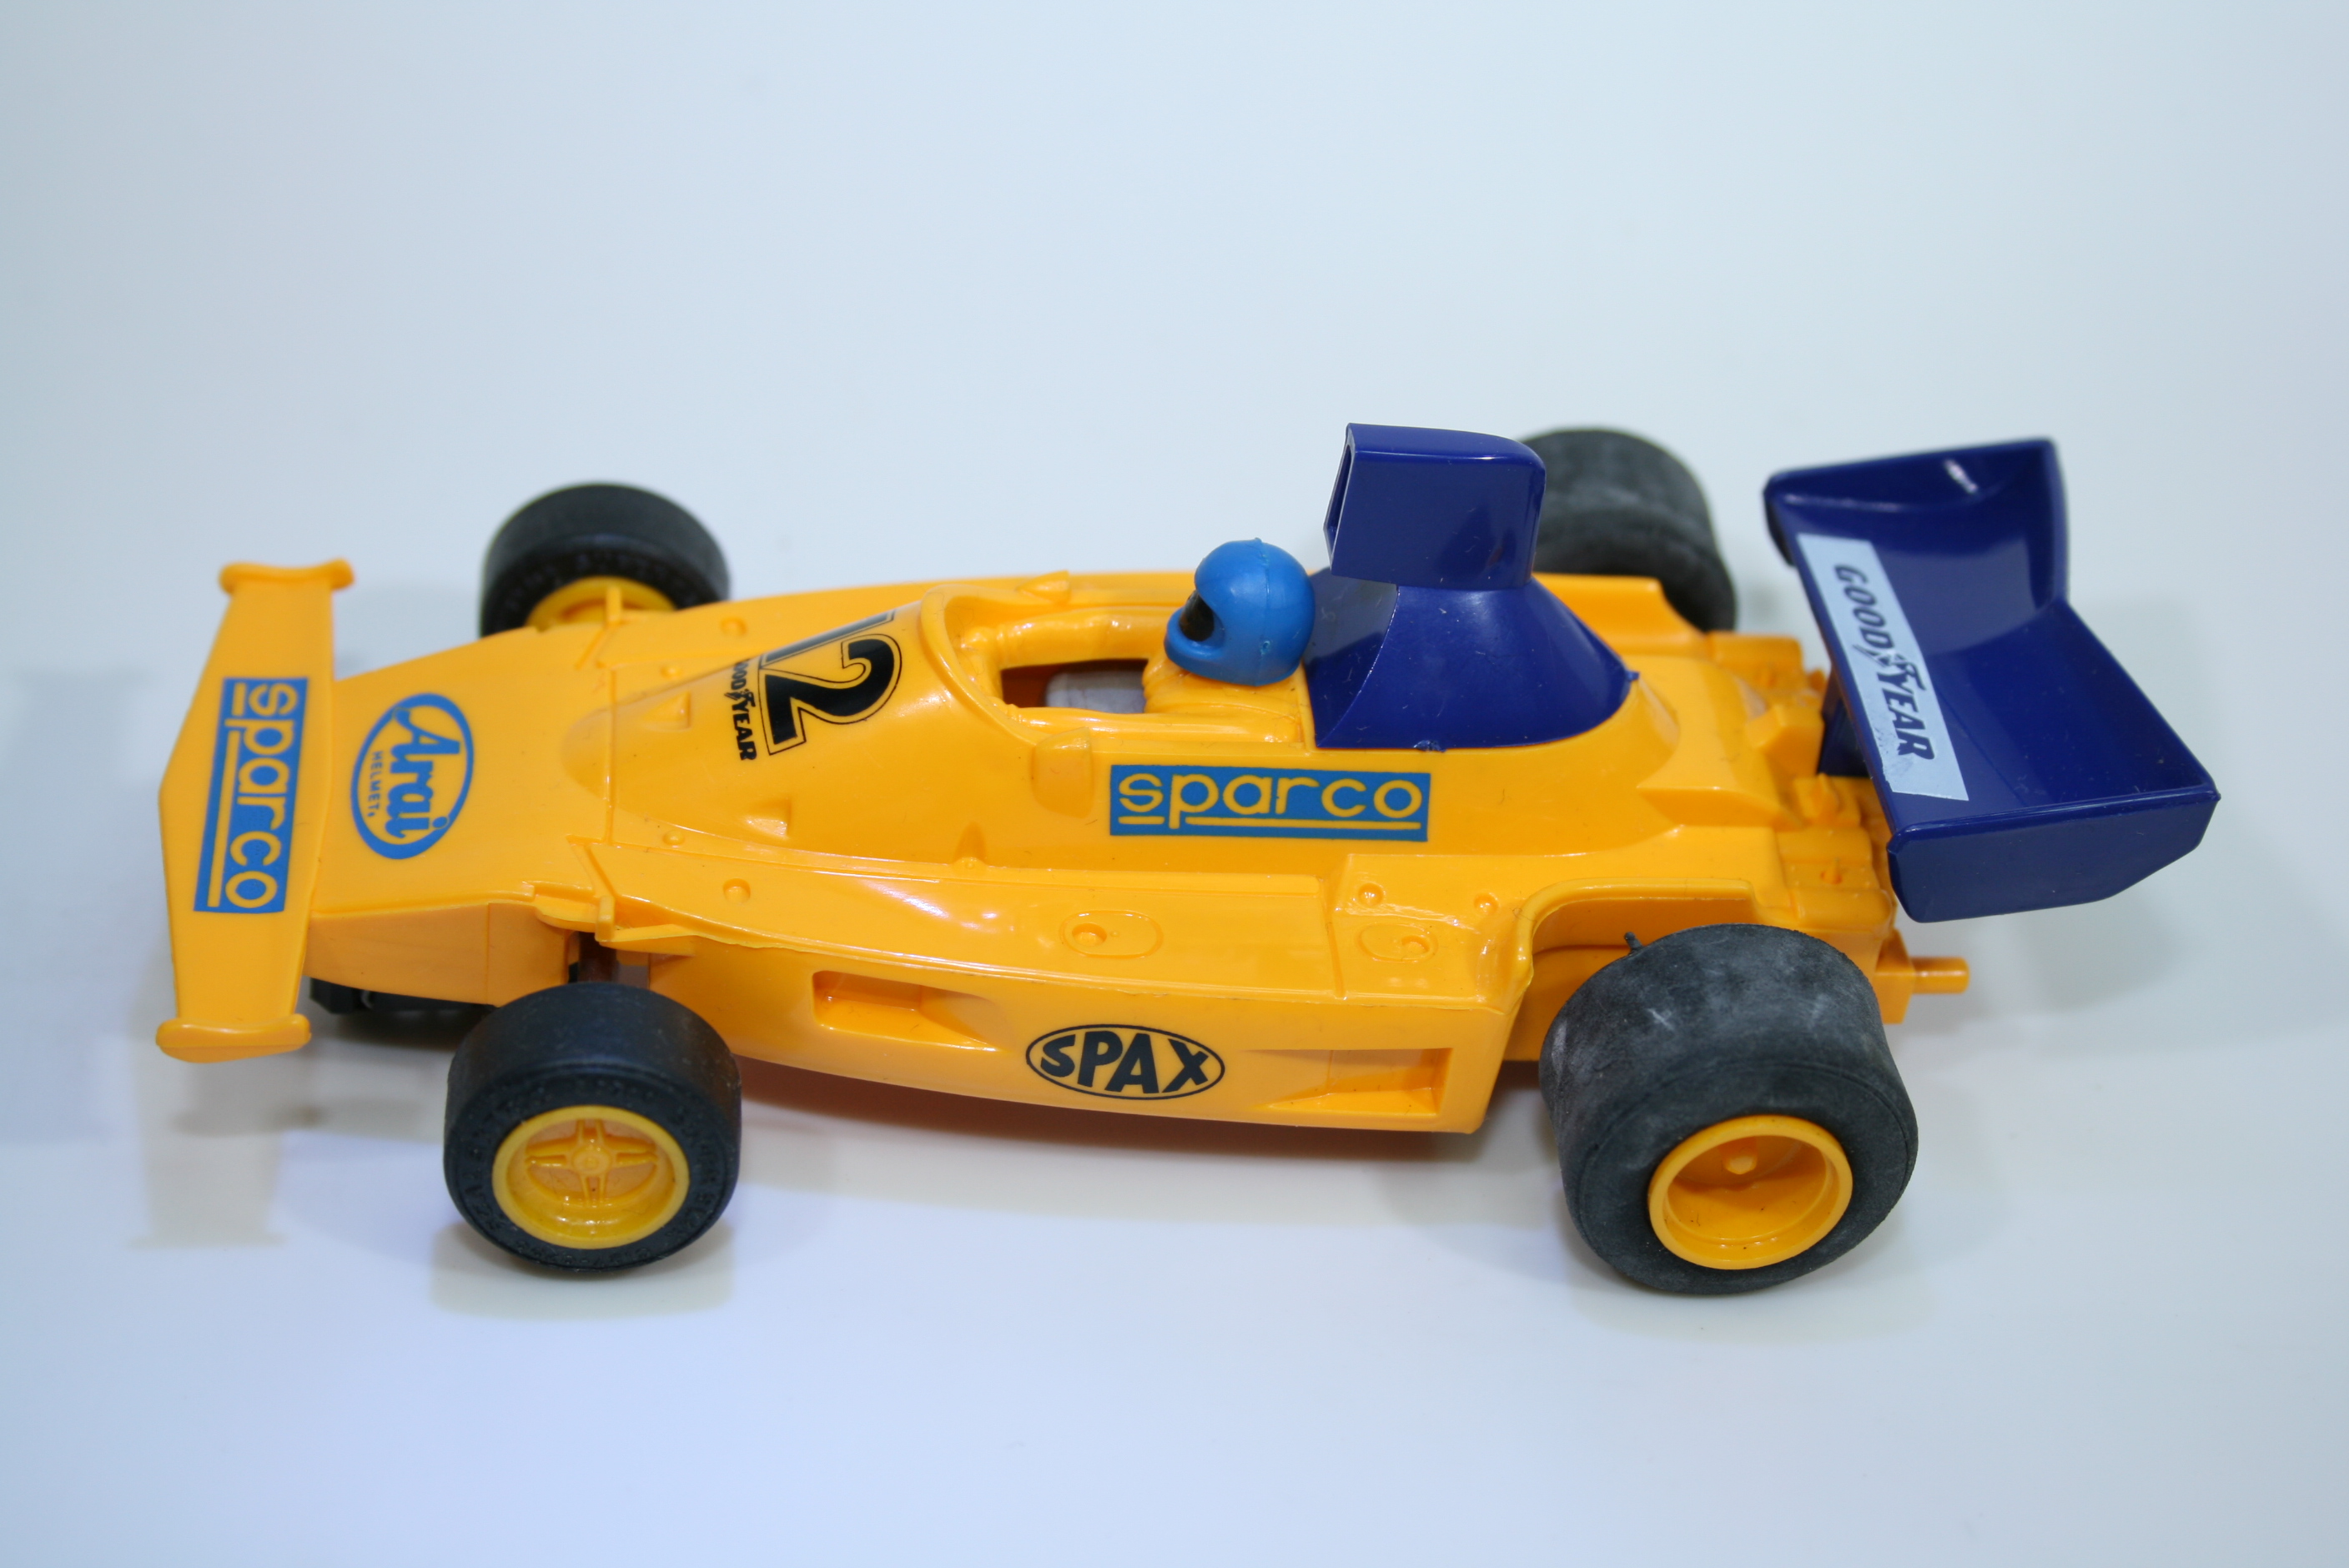 L6556 Scalextric Spare Underpan for Lotus Turboflash F1 car 